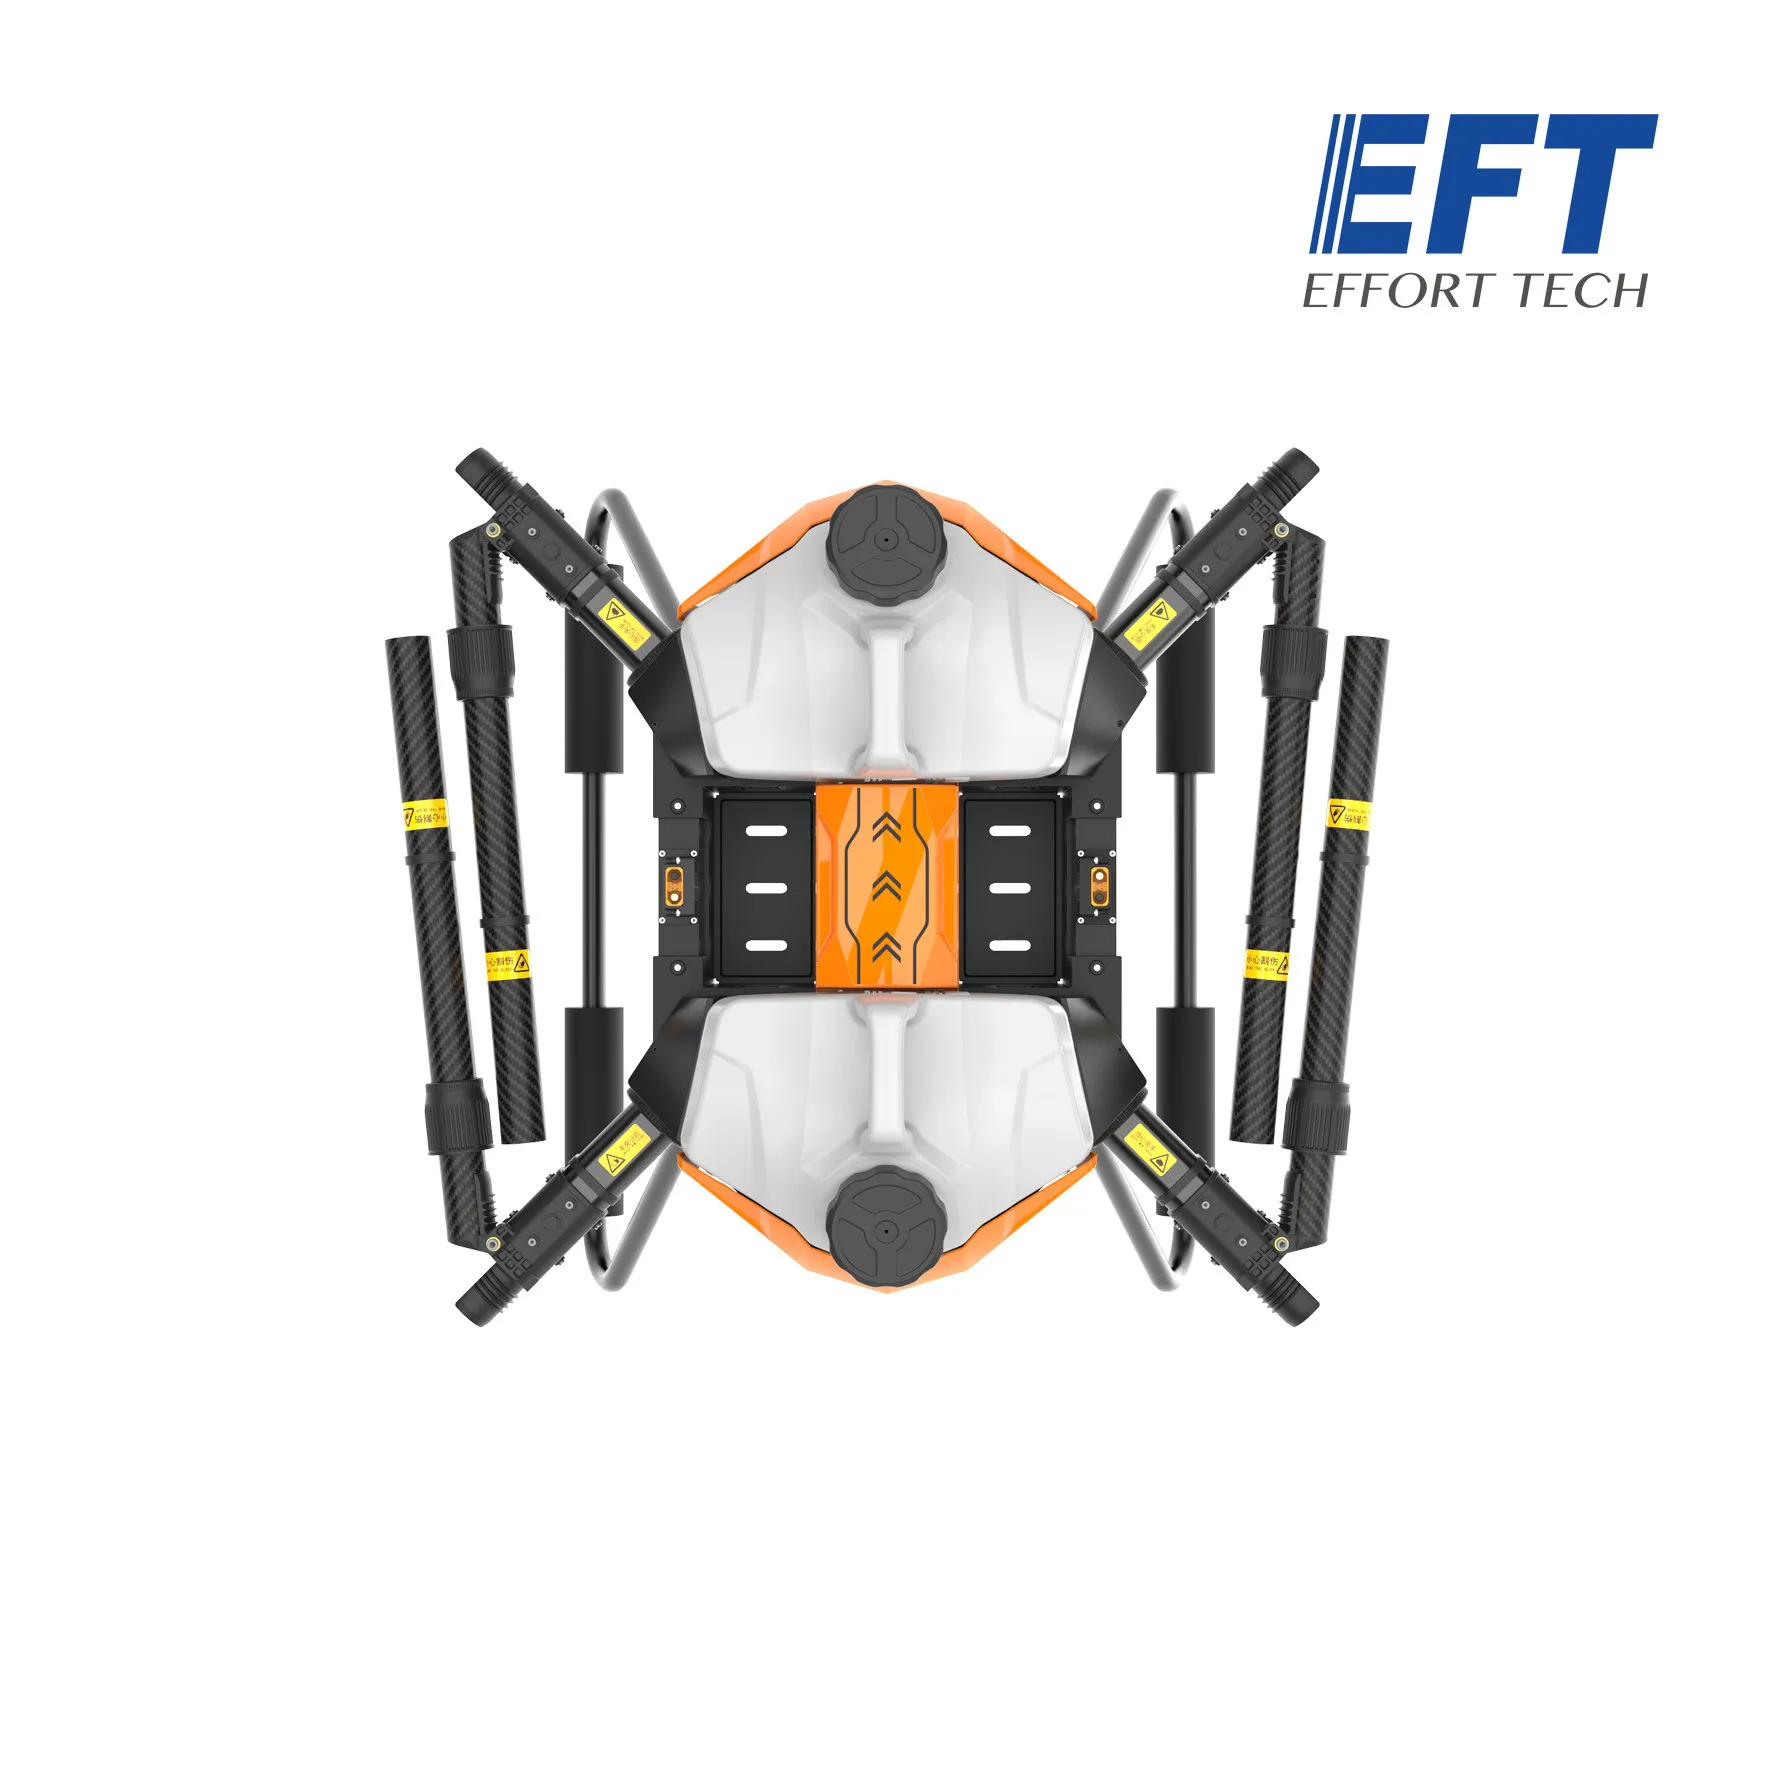 
EFT New upgrade G20-Q 4-axis 22L 22kg agricultural spray drone frame(1362mm wheelbase)and double water tank uav 